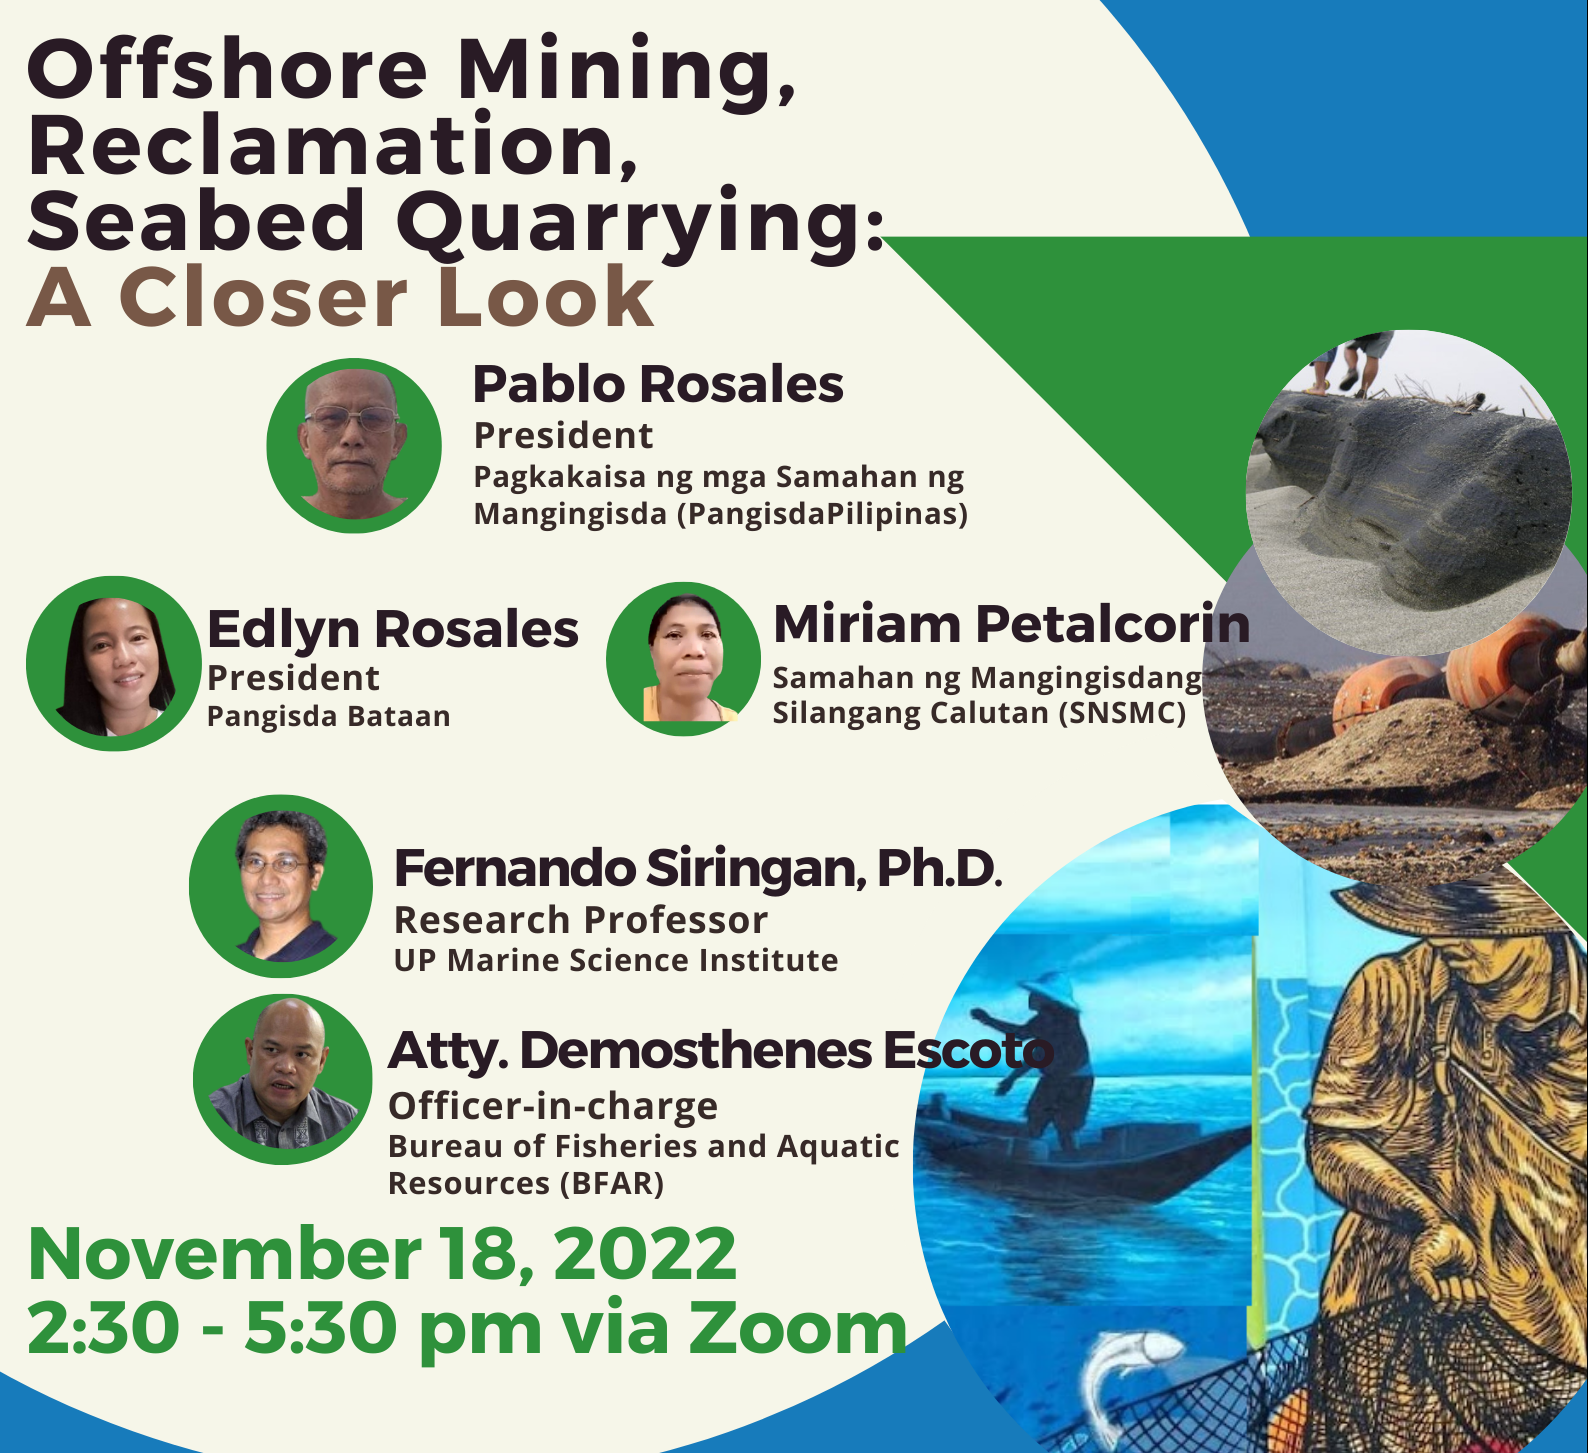 Offshore Mining, Reclamation, and Seabed Quarrying: A Closer Look